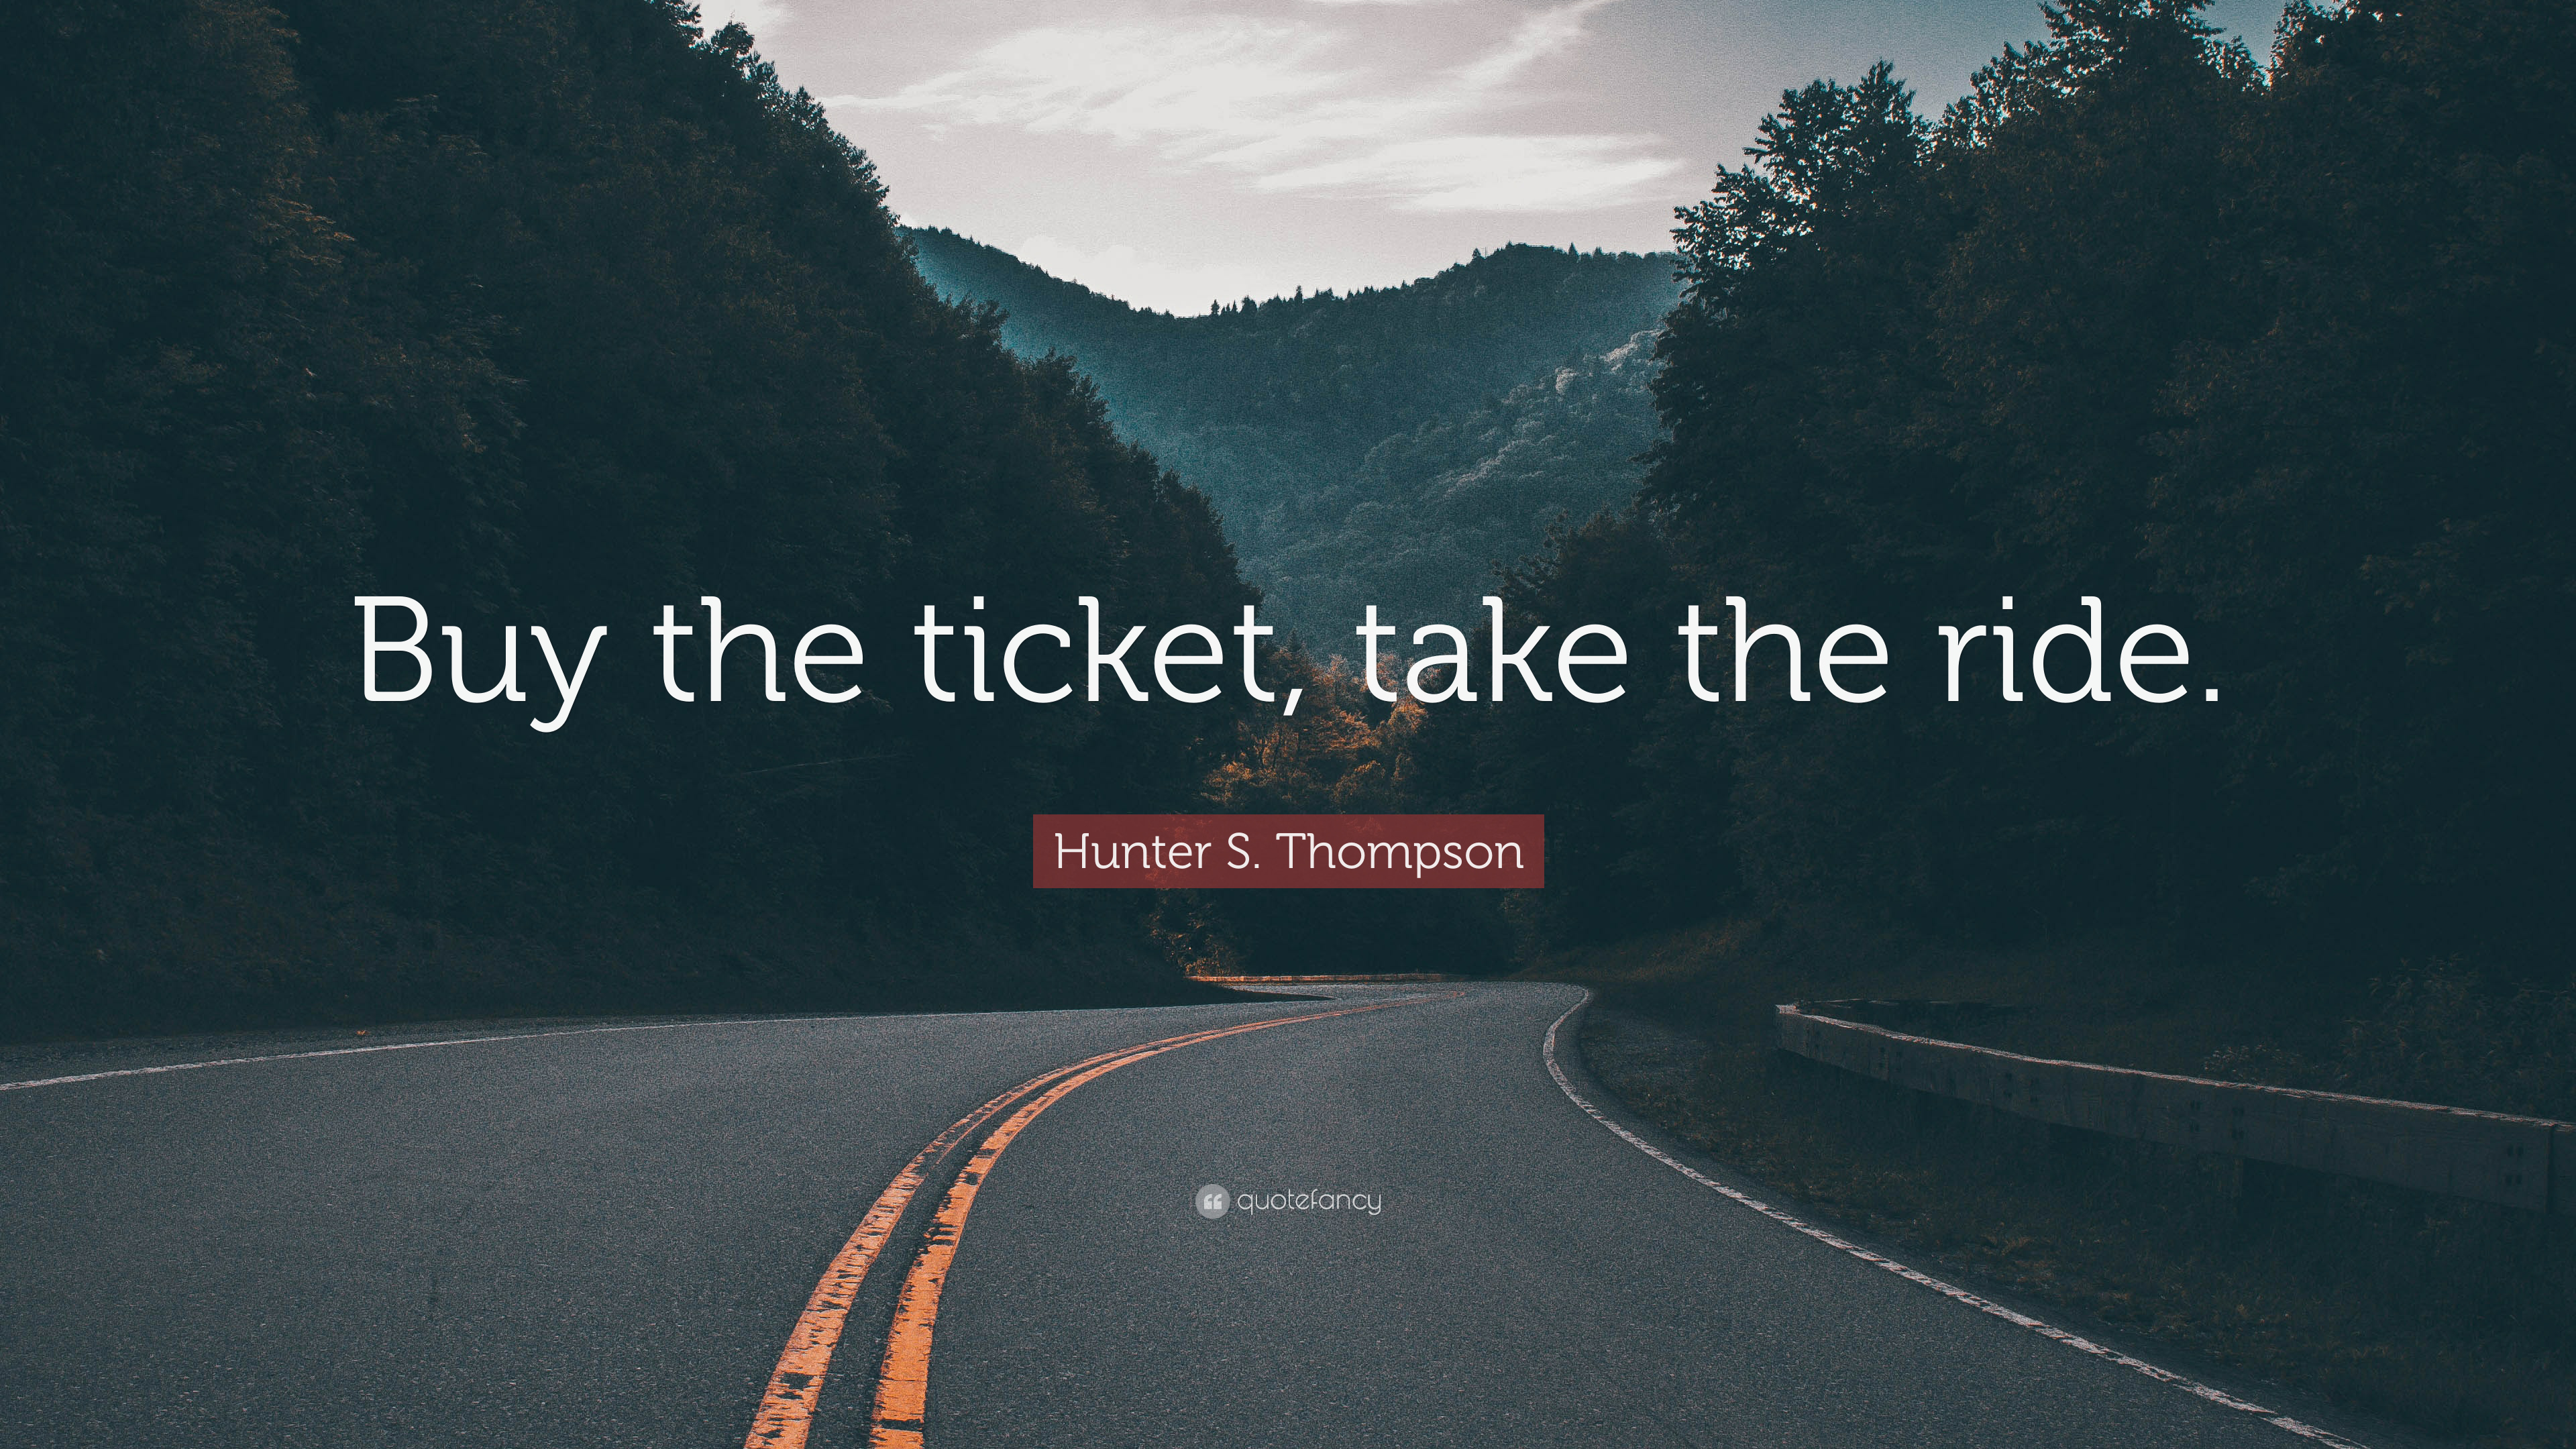 Hunter S. Thompson Quote: “Buy the ticket, take the ride.” 12